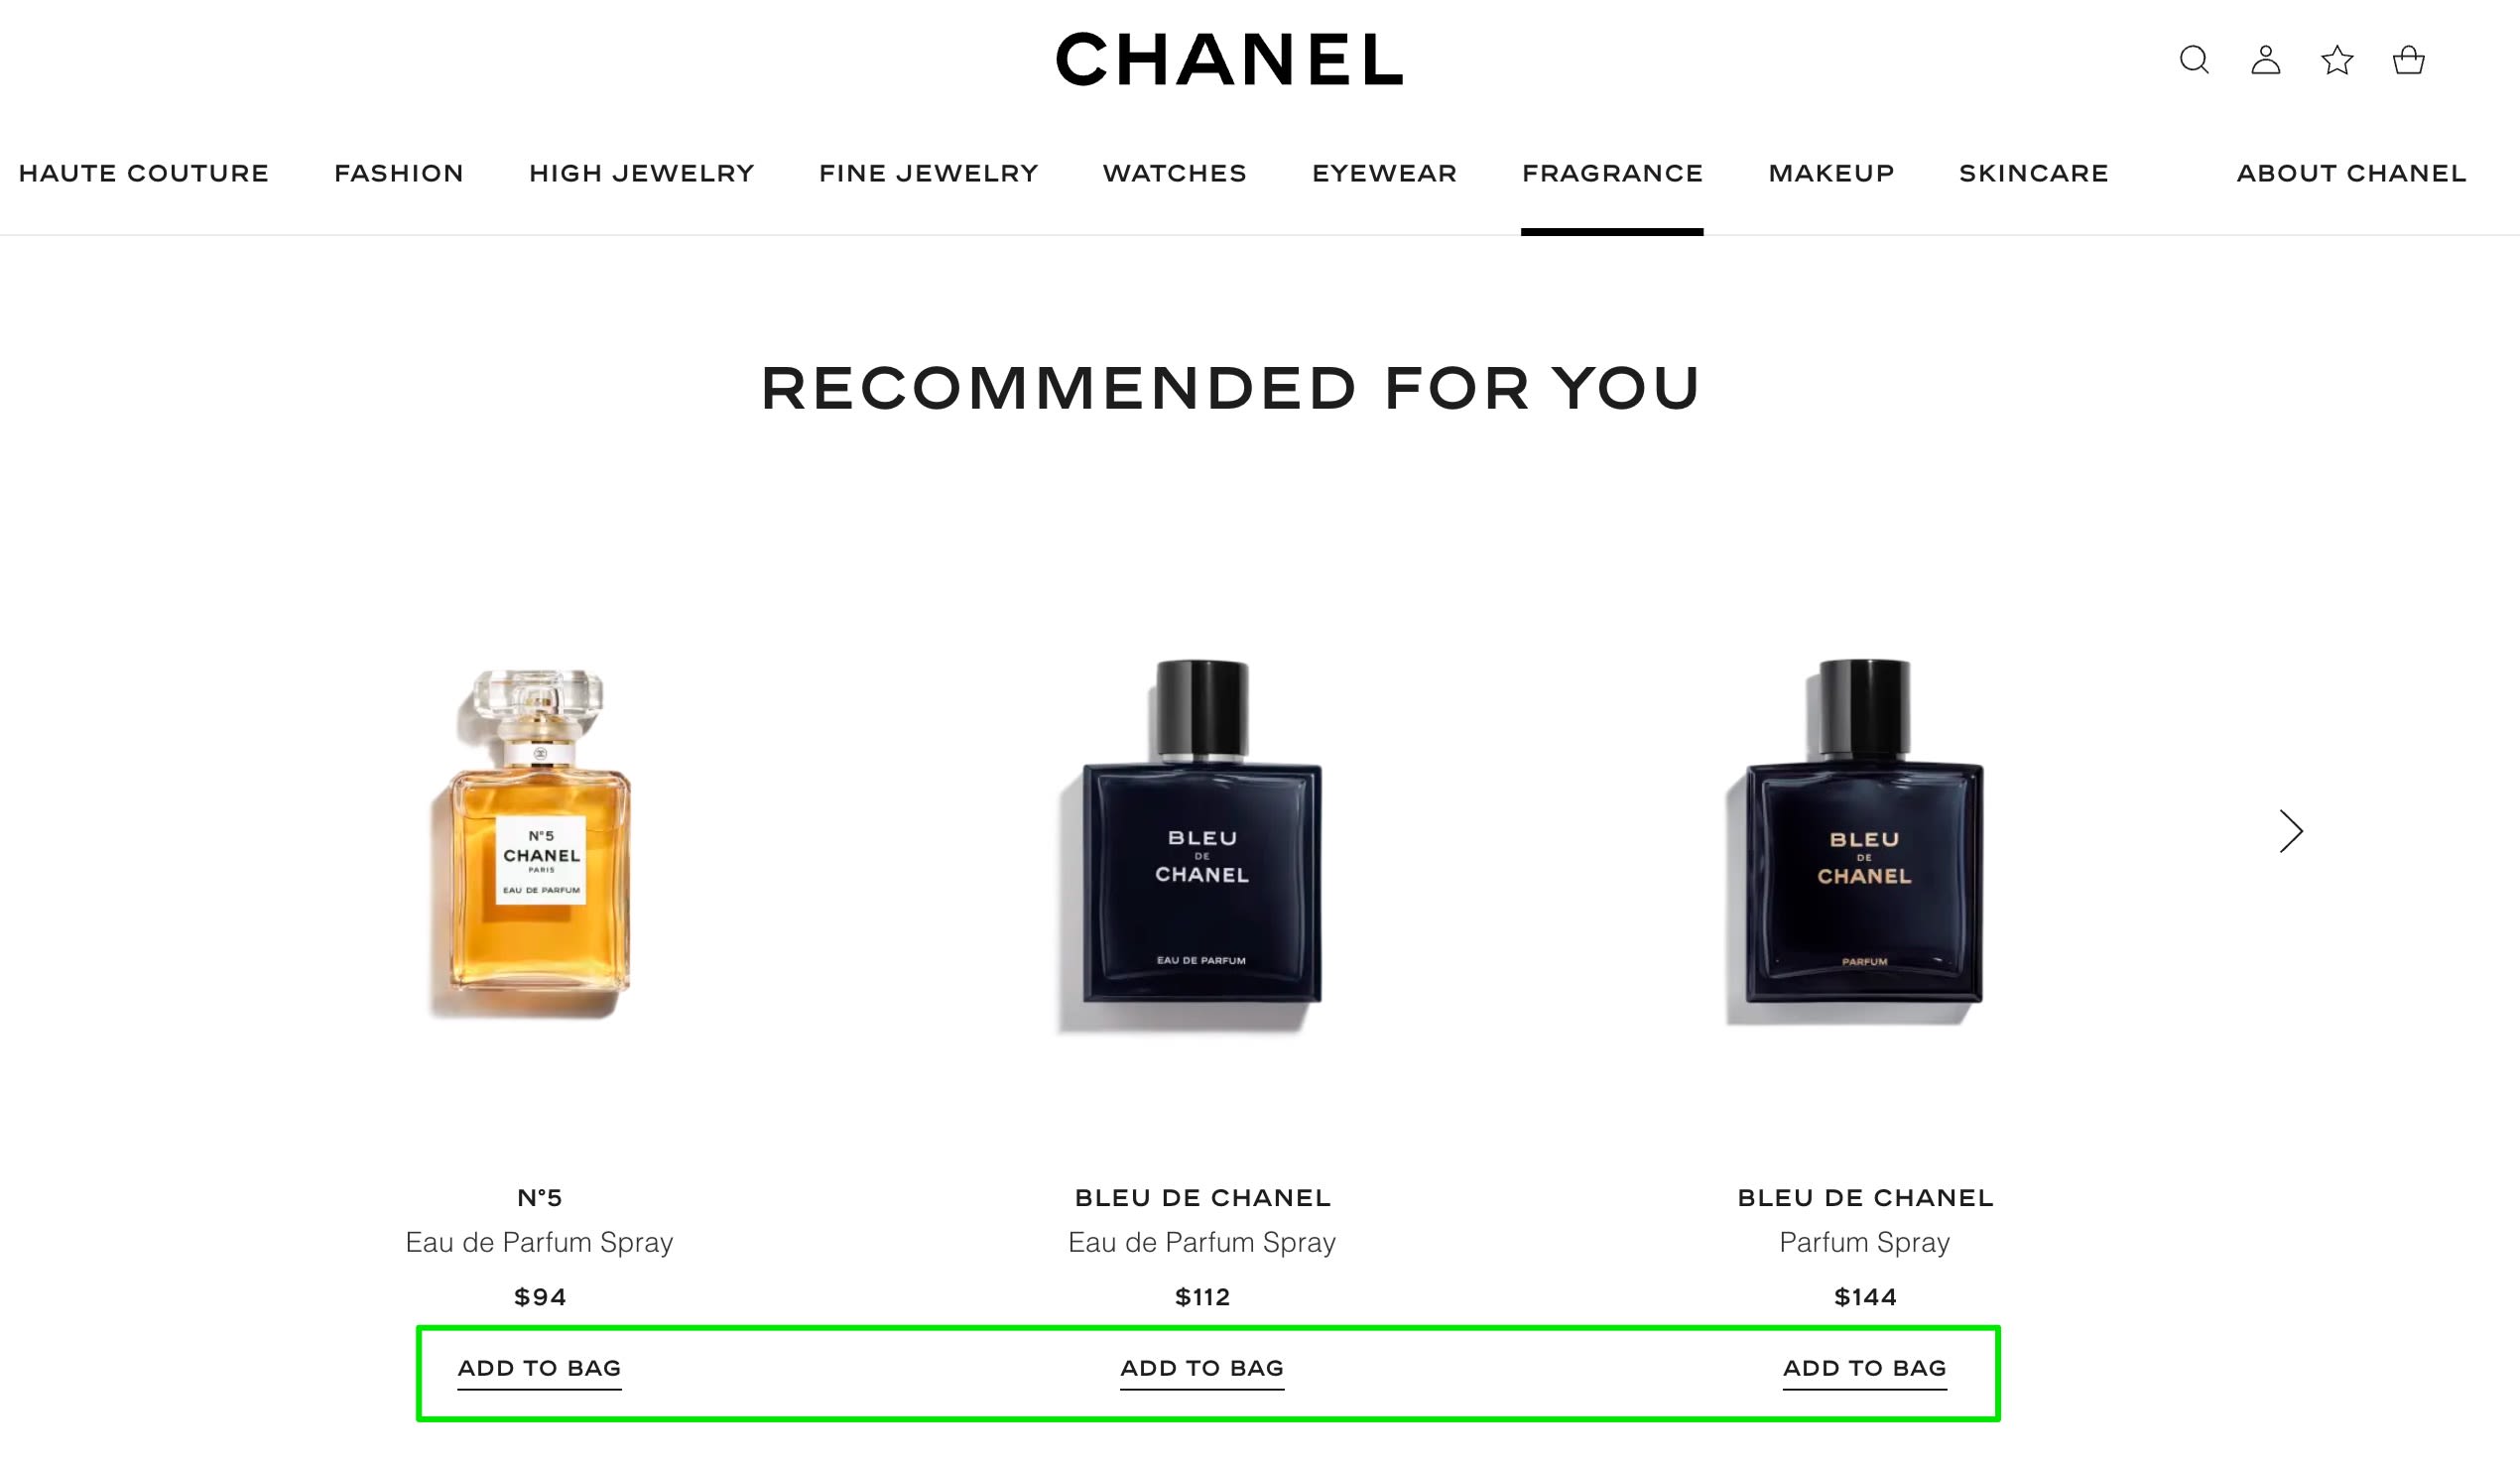 Chanel's recommendation system